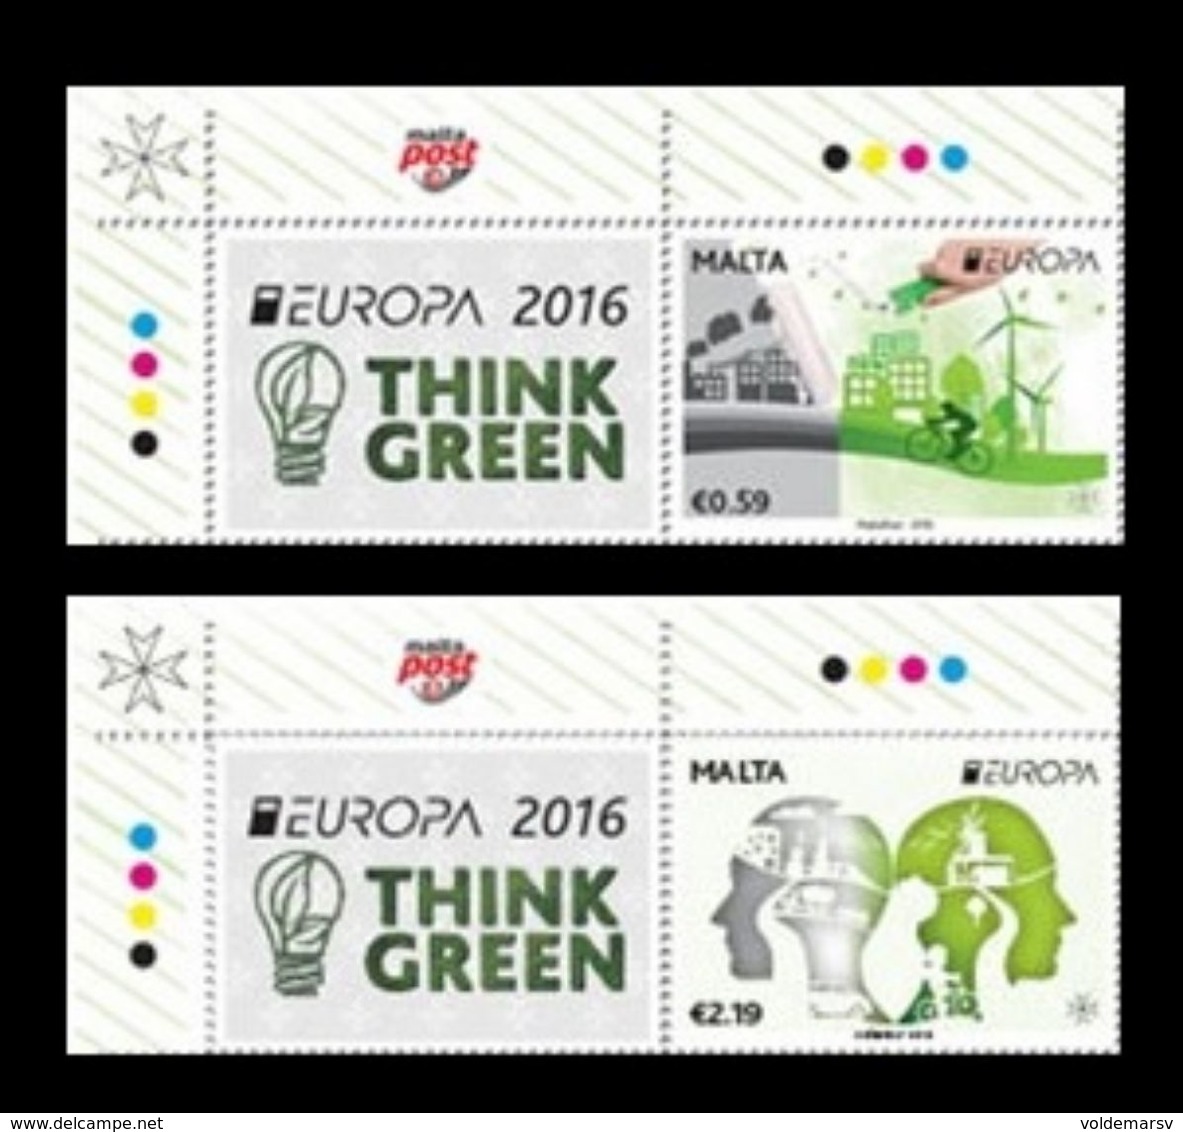 Malta 2016 Mih. 1927/28 Europa-Cept. Think Green (with Labels) MNH ** - Malta